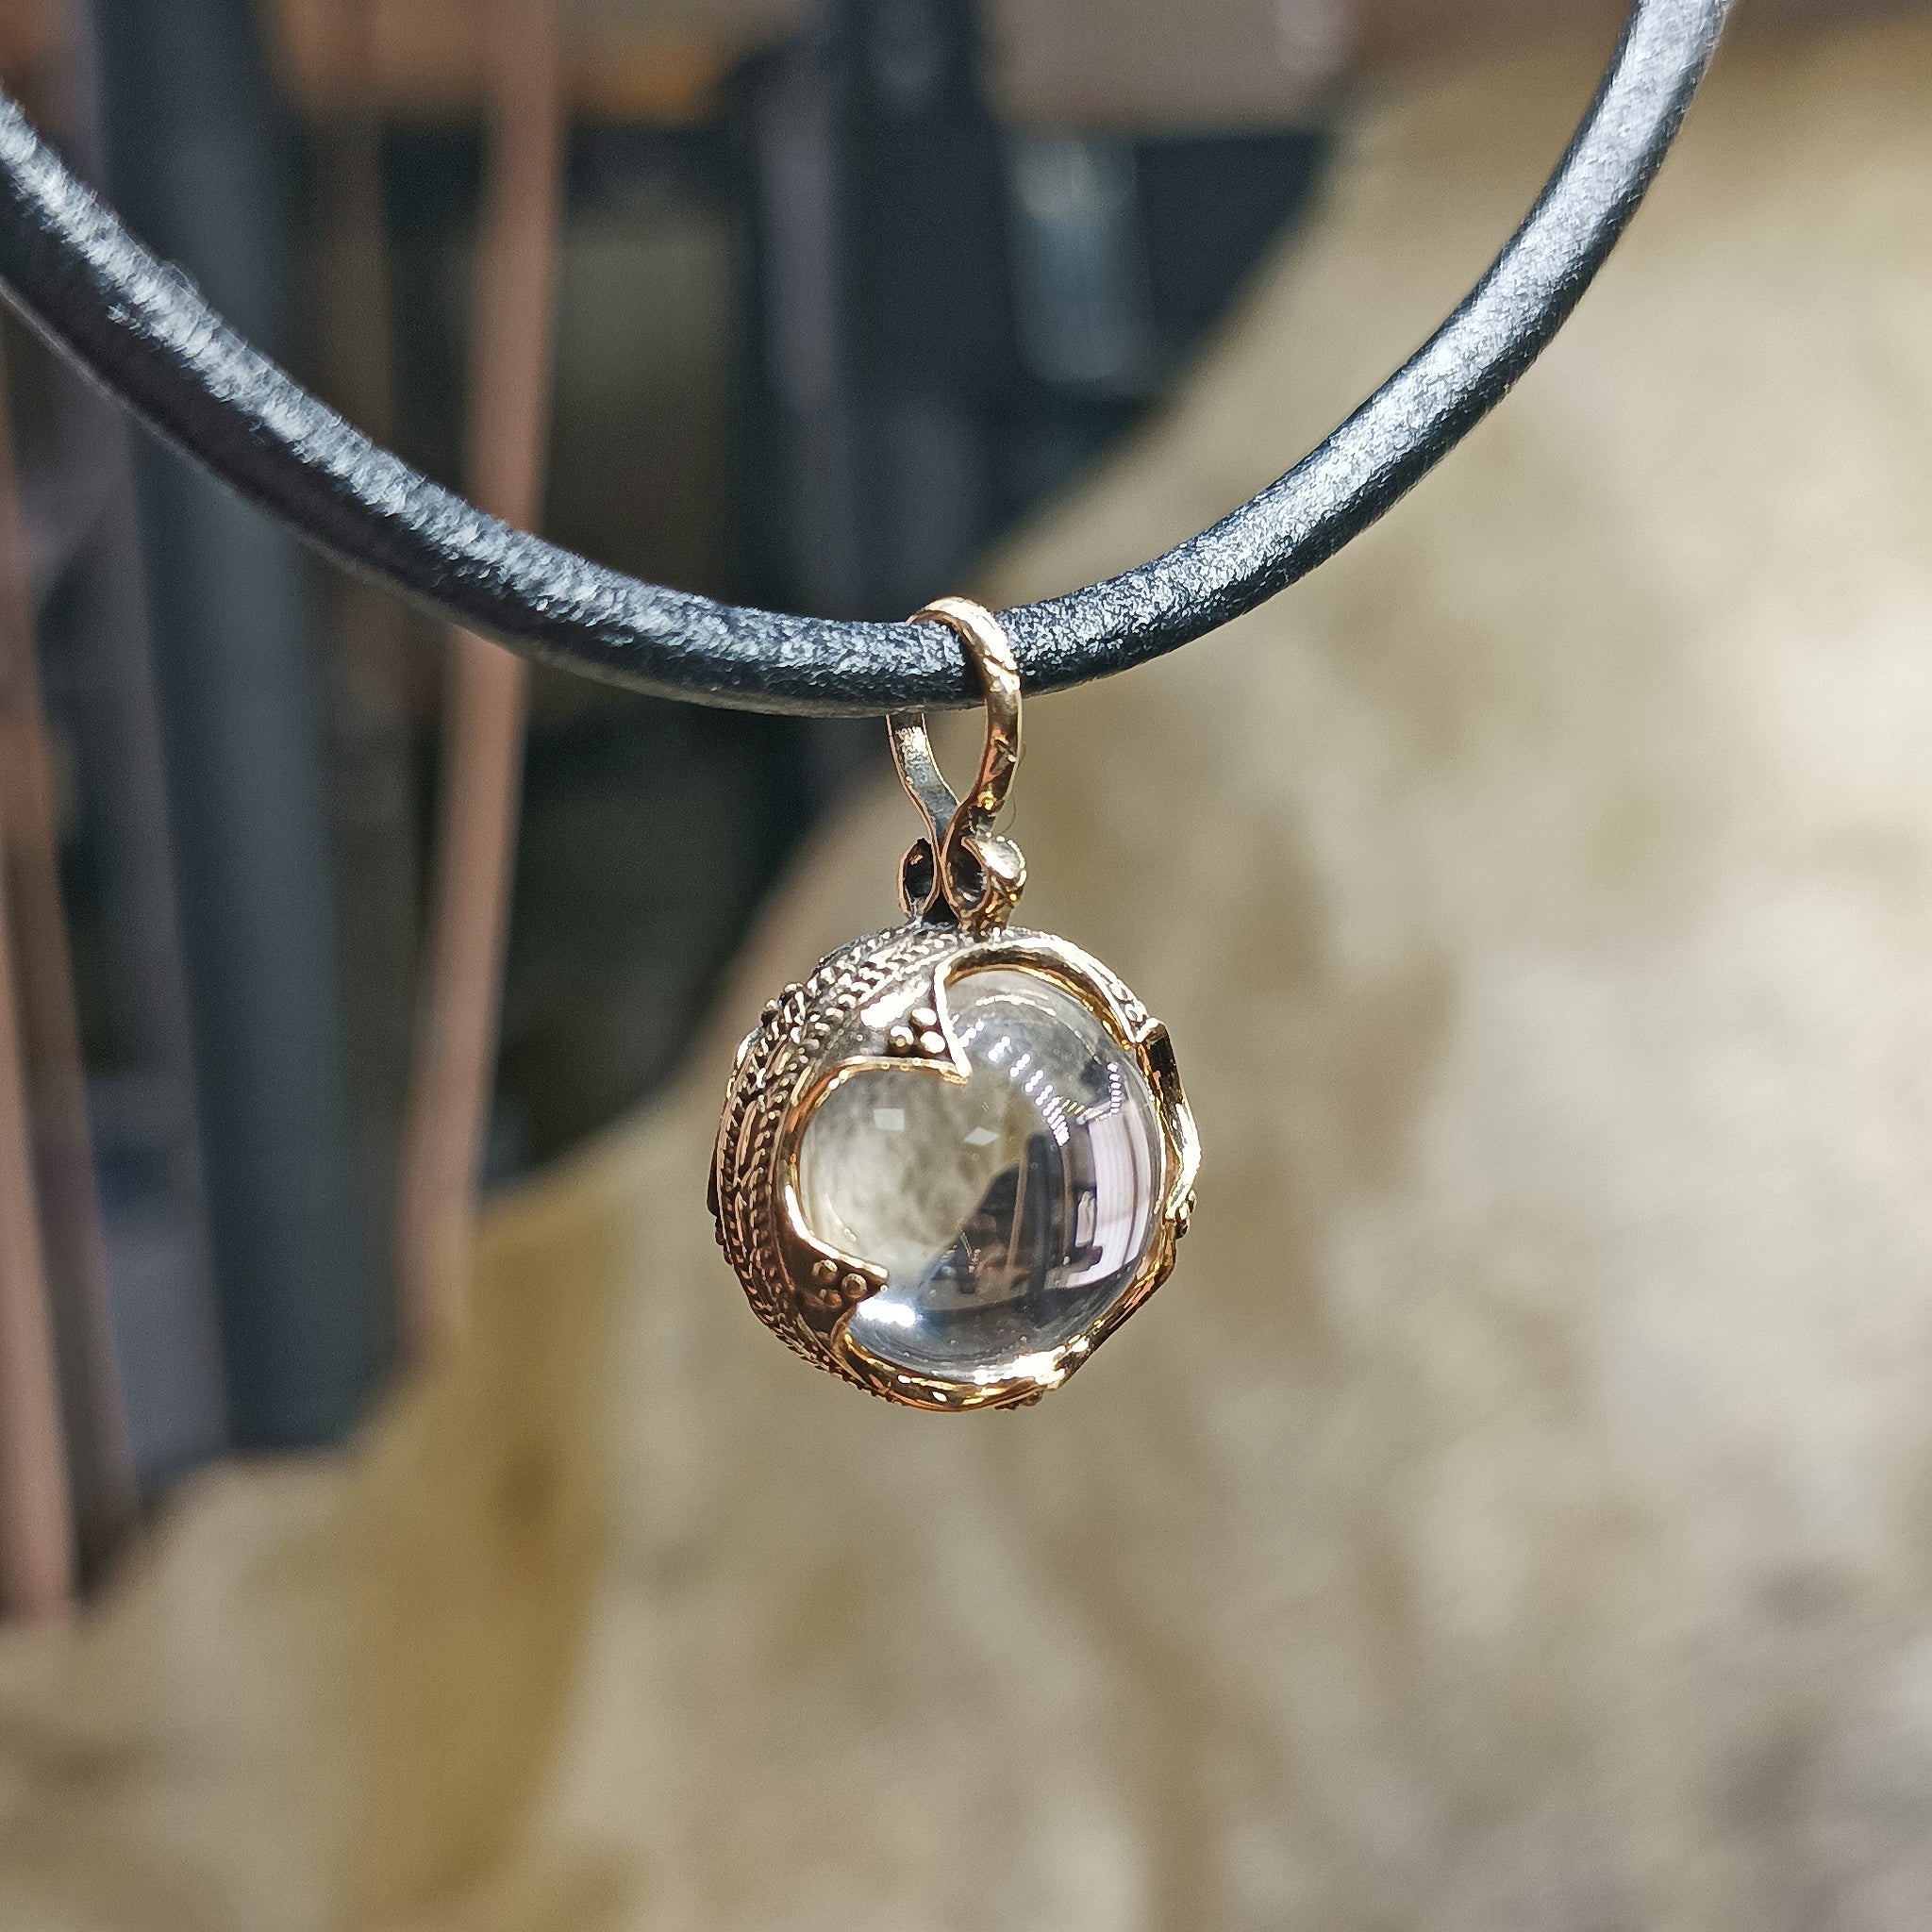 Small Bronze Gotland Crystal Ball Pendant on Leather Thong